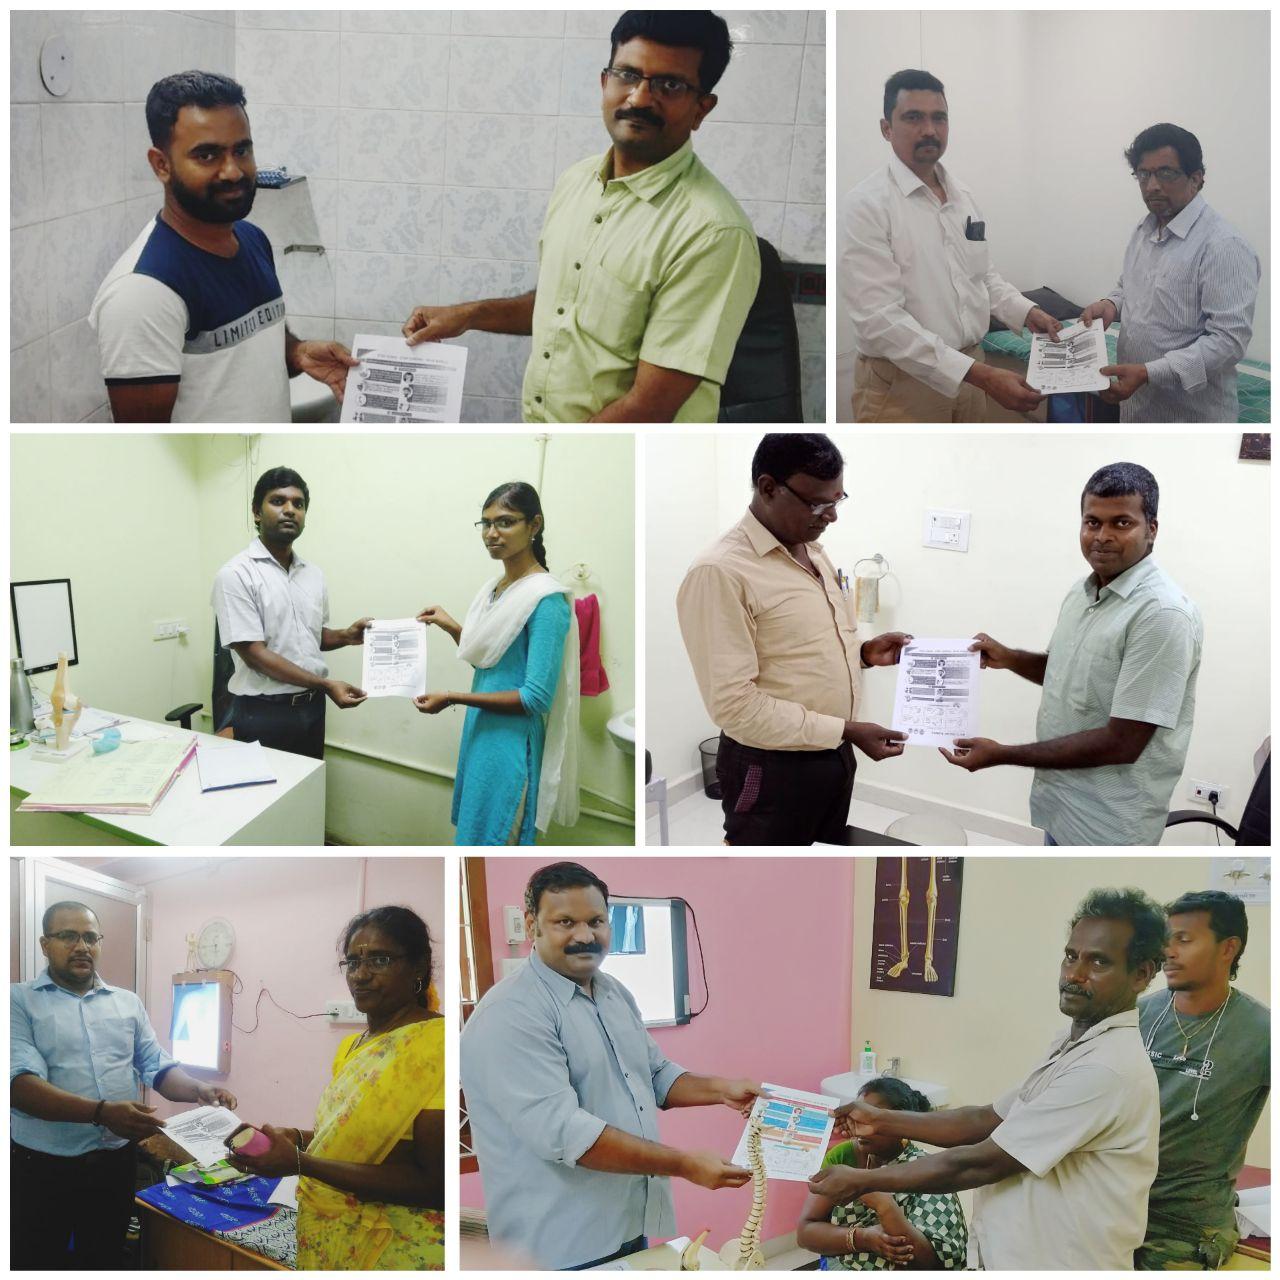 2020.03.20-Distribution-of-PAMPHLETS-to-stop-COVID-19-by-Kanchi-Ortho-Club-Members